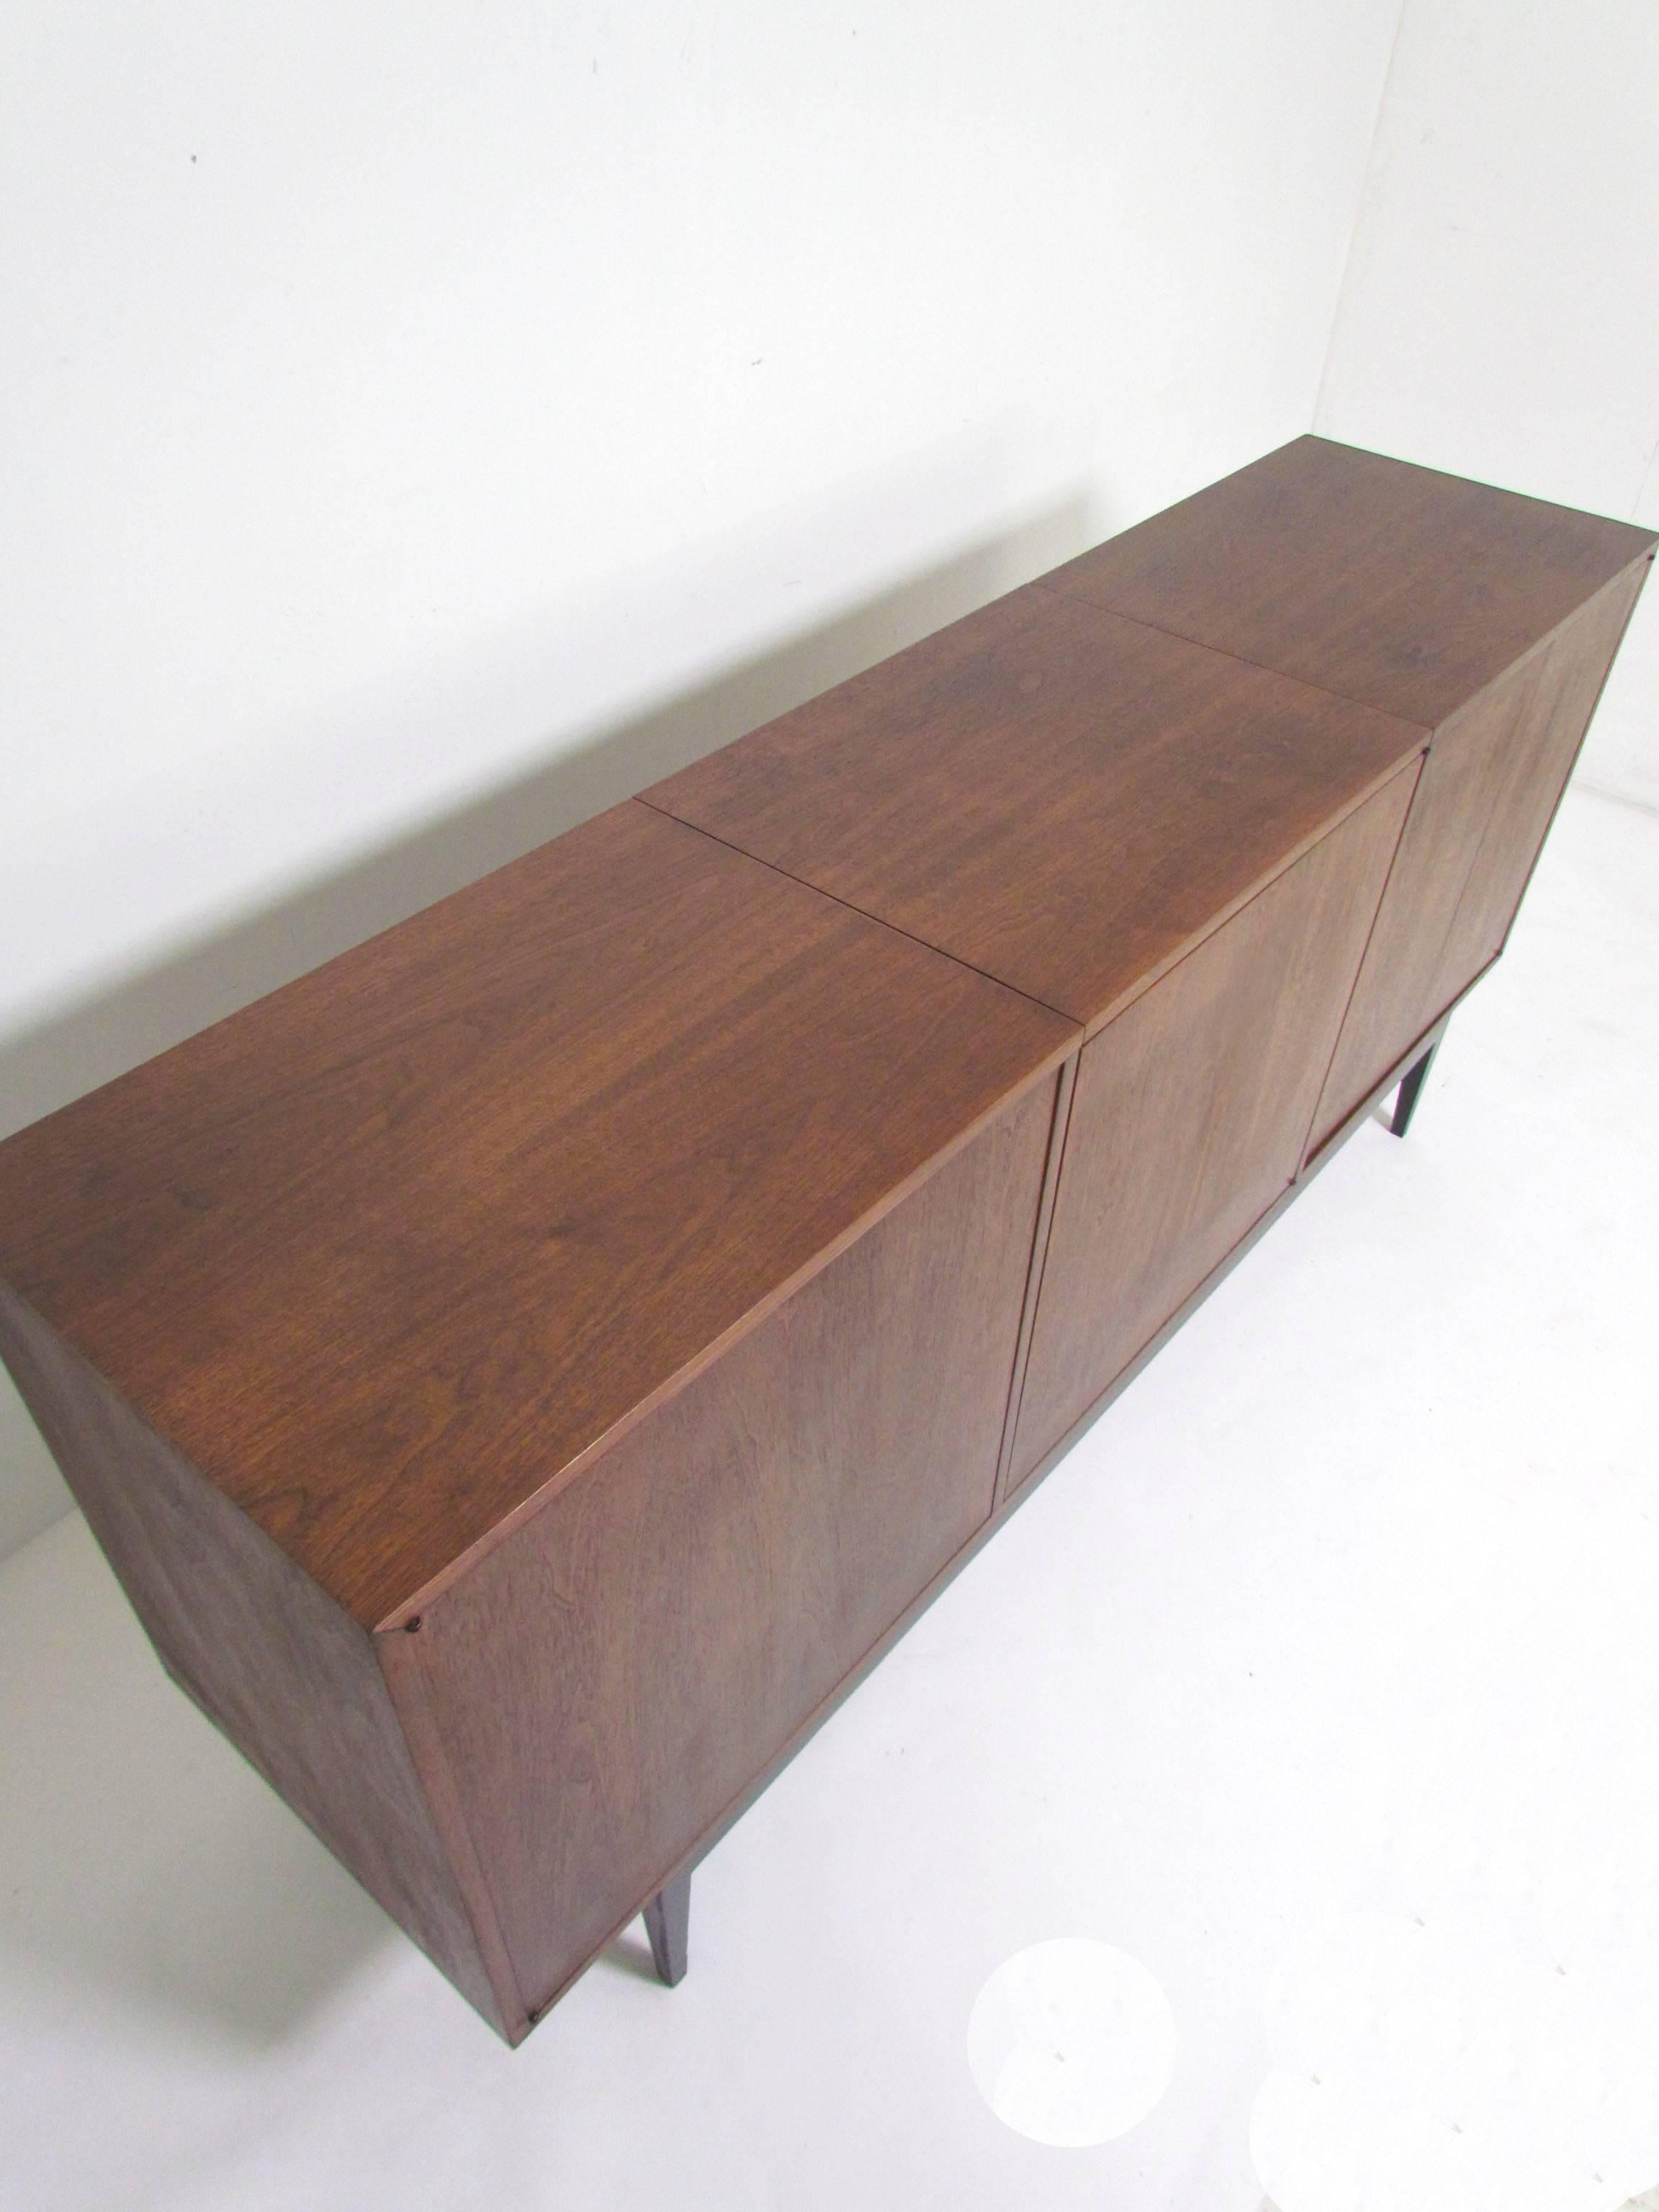 Mid-Century Modern credenza in walnut with ebonized base, three bi-fold doors reveal ample storage; top compartment reveals shallow drawer for flatware or other items. In the manner of Paul McCobb or Harvey Probber.